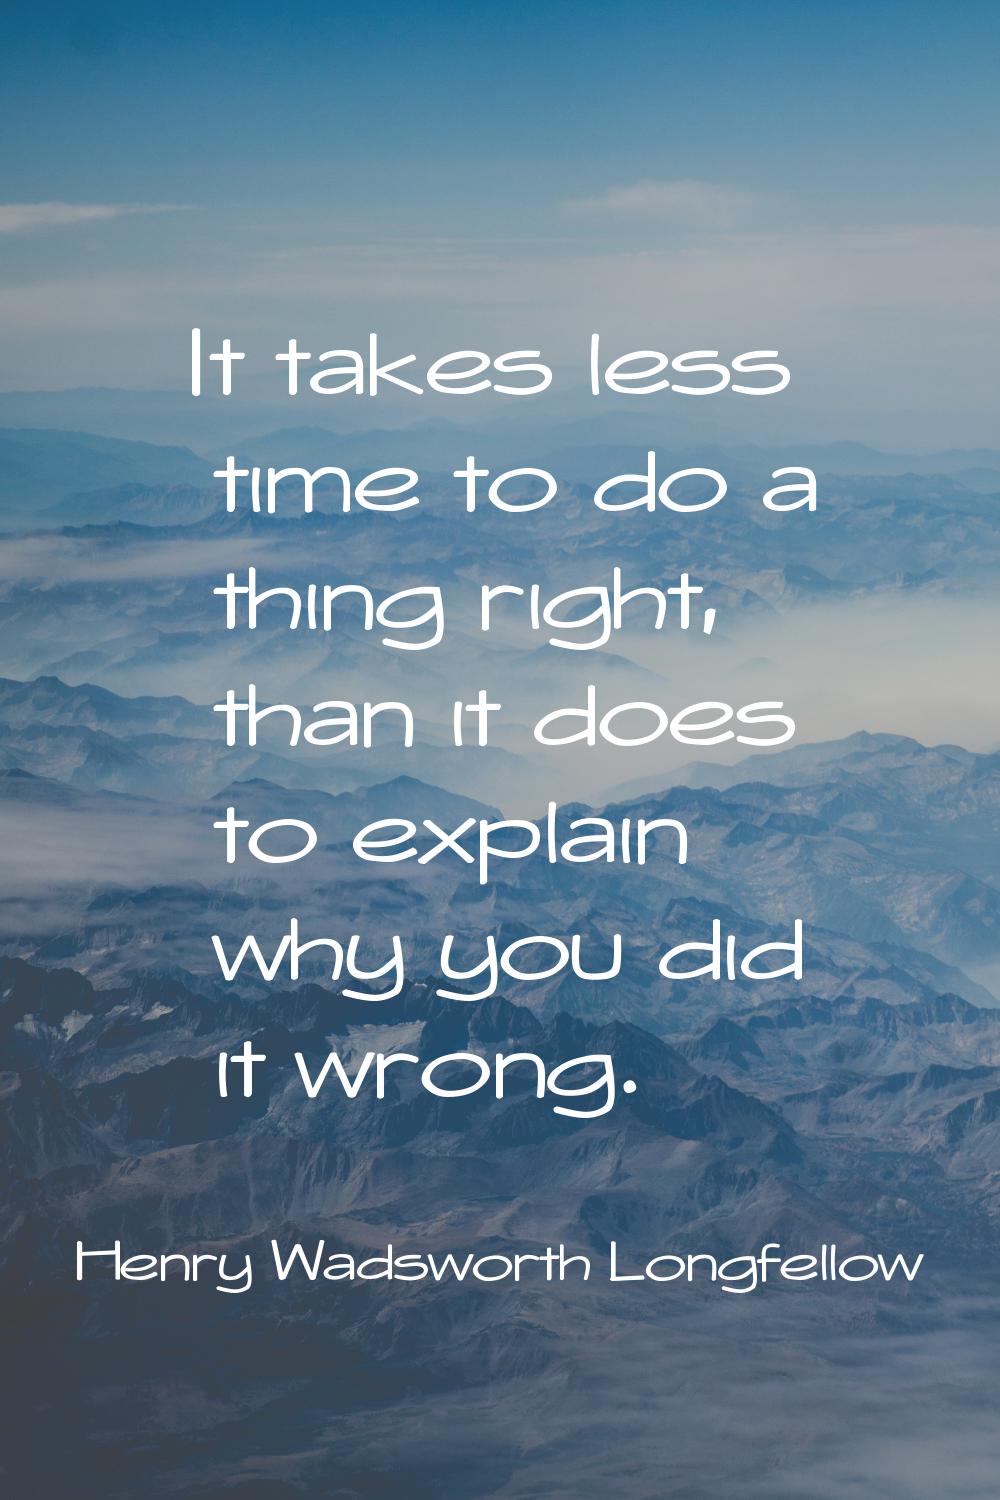 It takes less time to do a thing right, than it does to explain why you did it wrong.